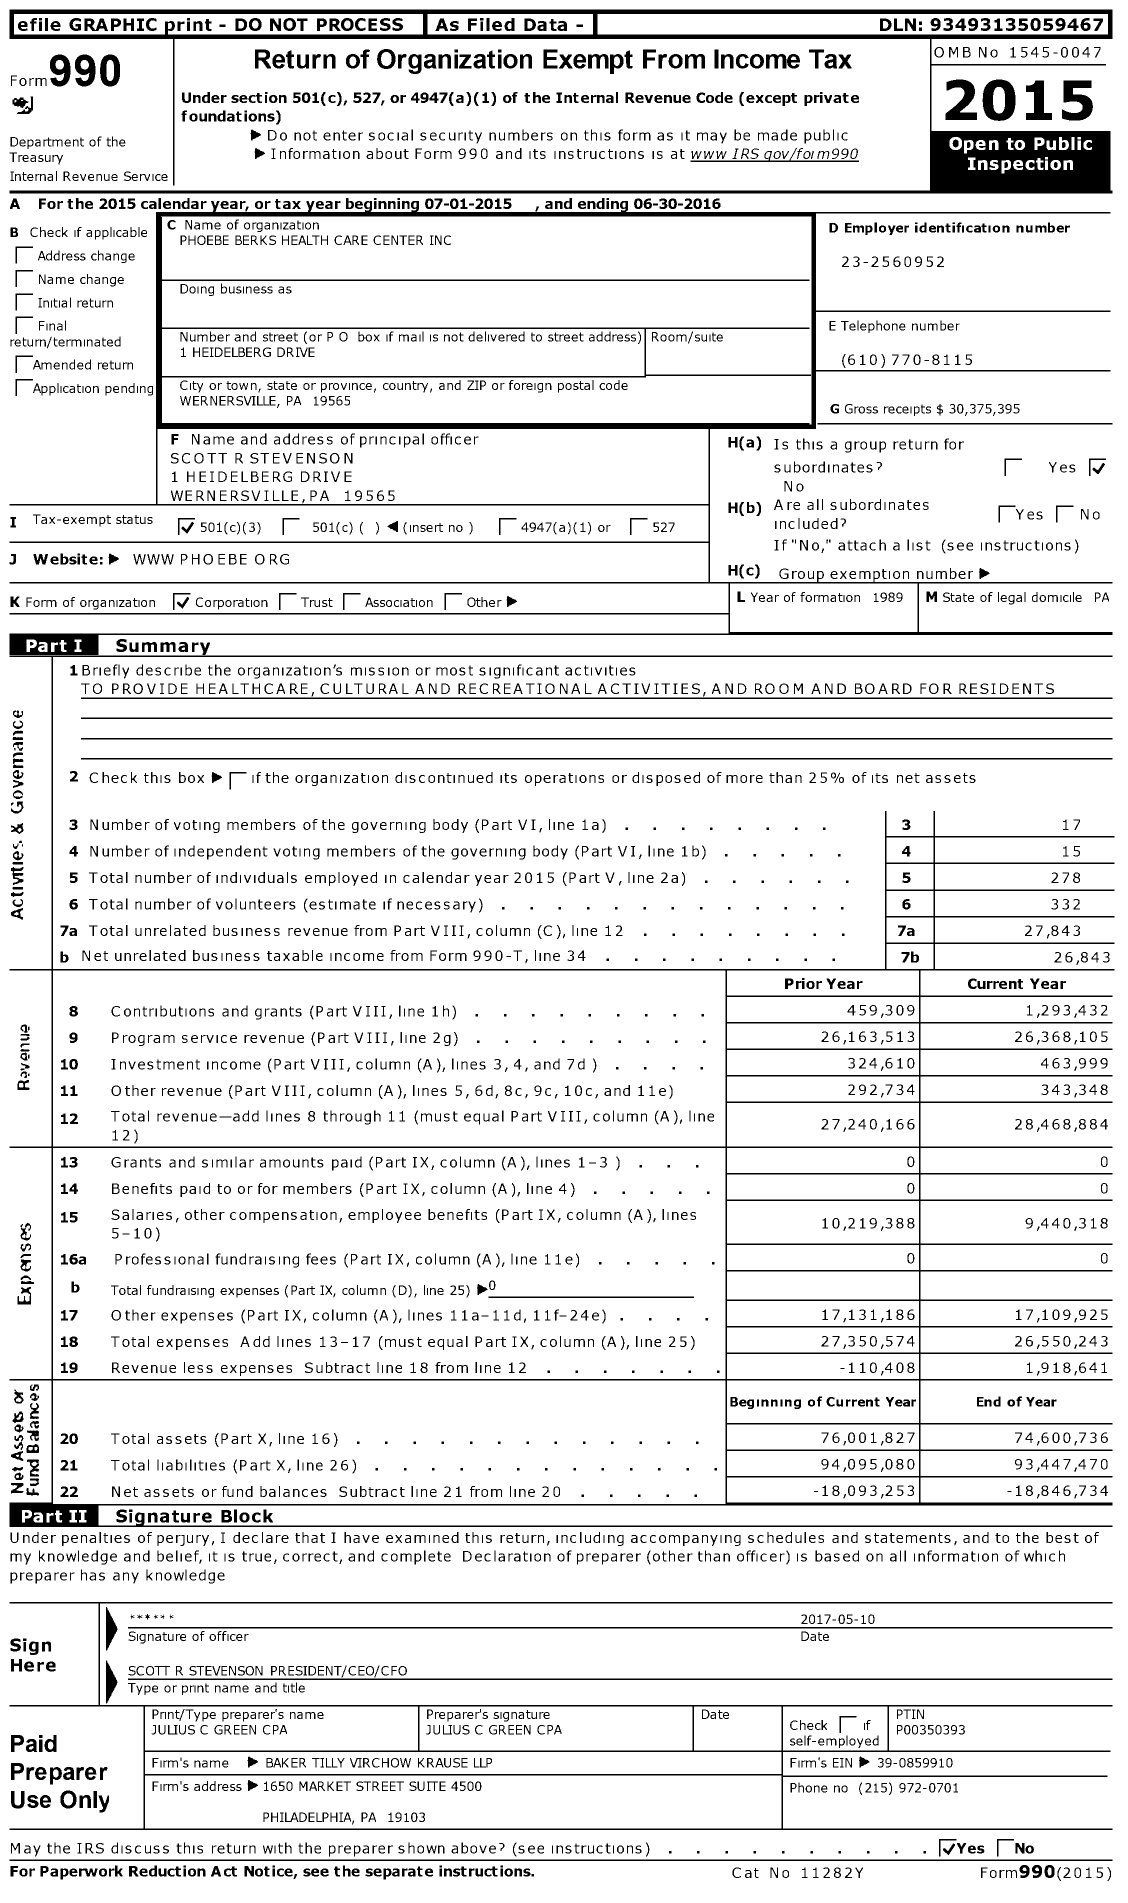 Image of first page of 2015 Form 990 for Phoebe Berks Health Care Center